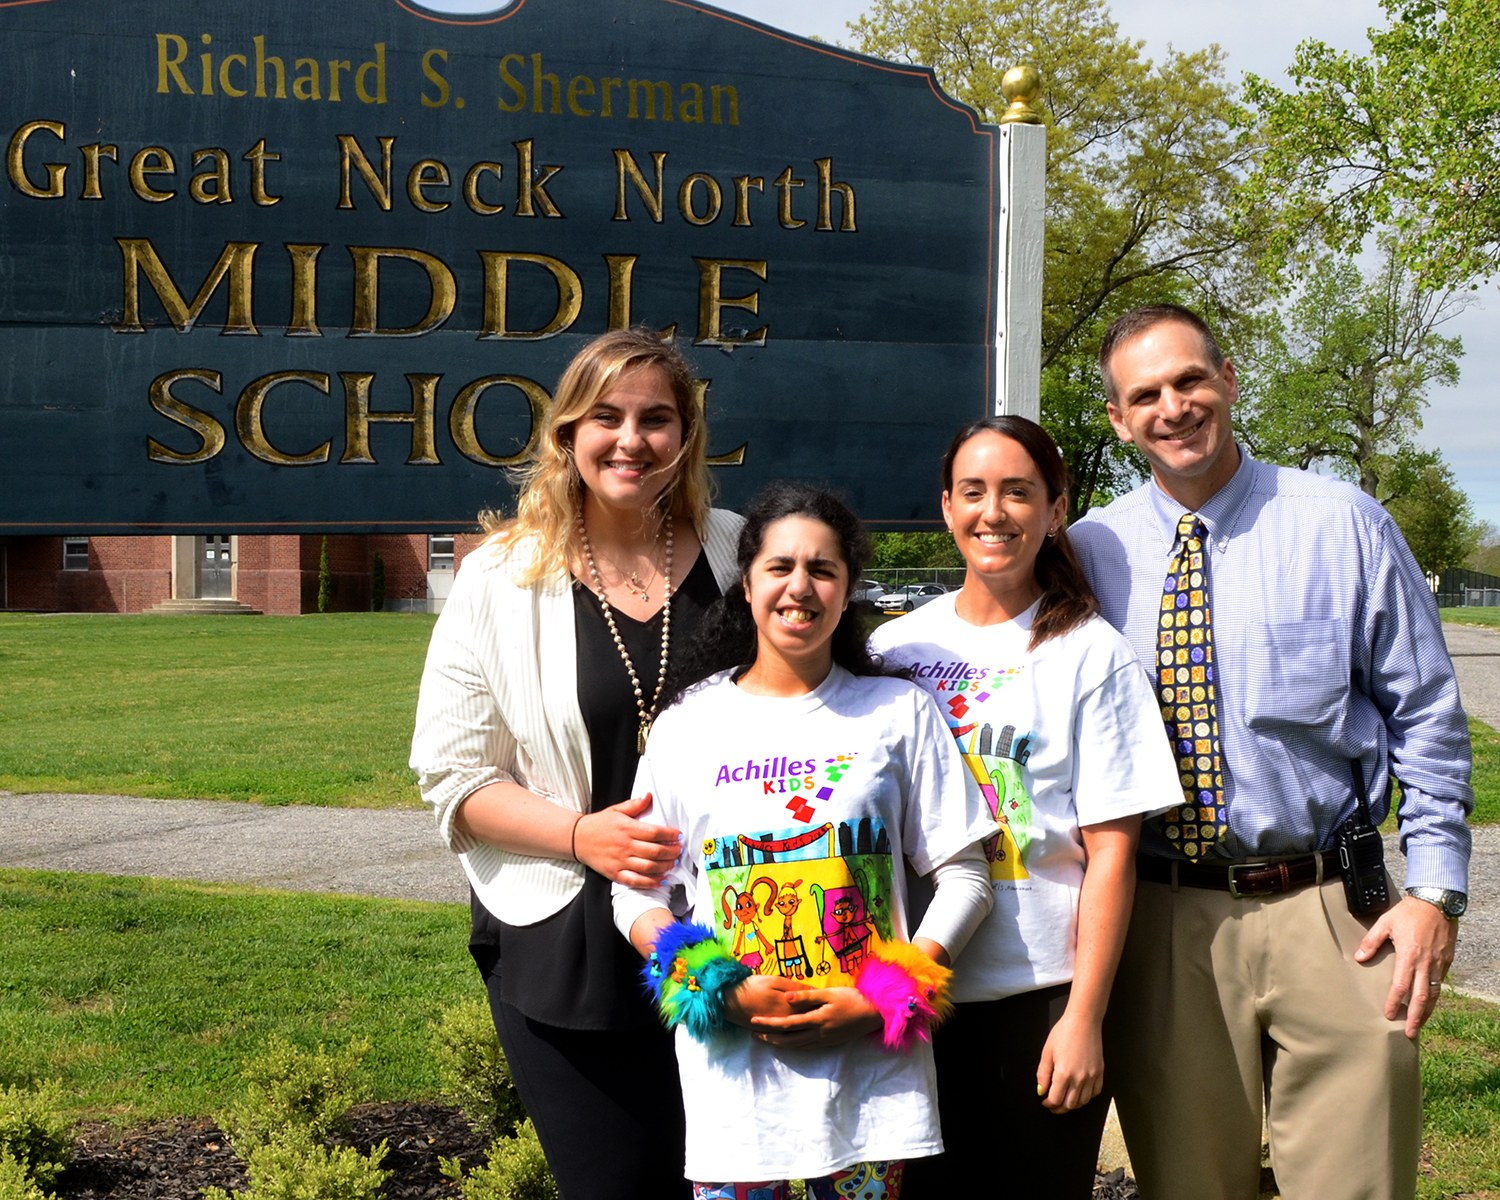 Jewels Rahmanan, wearing her winning t-shirt design for the 2019 Achilles Kids International Program, is photographed with North Middle School teachers Jeryl Lehmuller and Michelle Sicurella, and Principal Gerald Cozine. (Photo by Irwin Mendlinger)